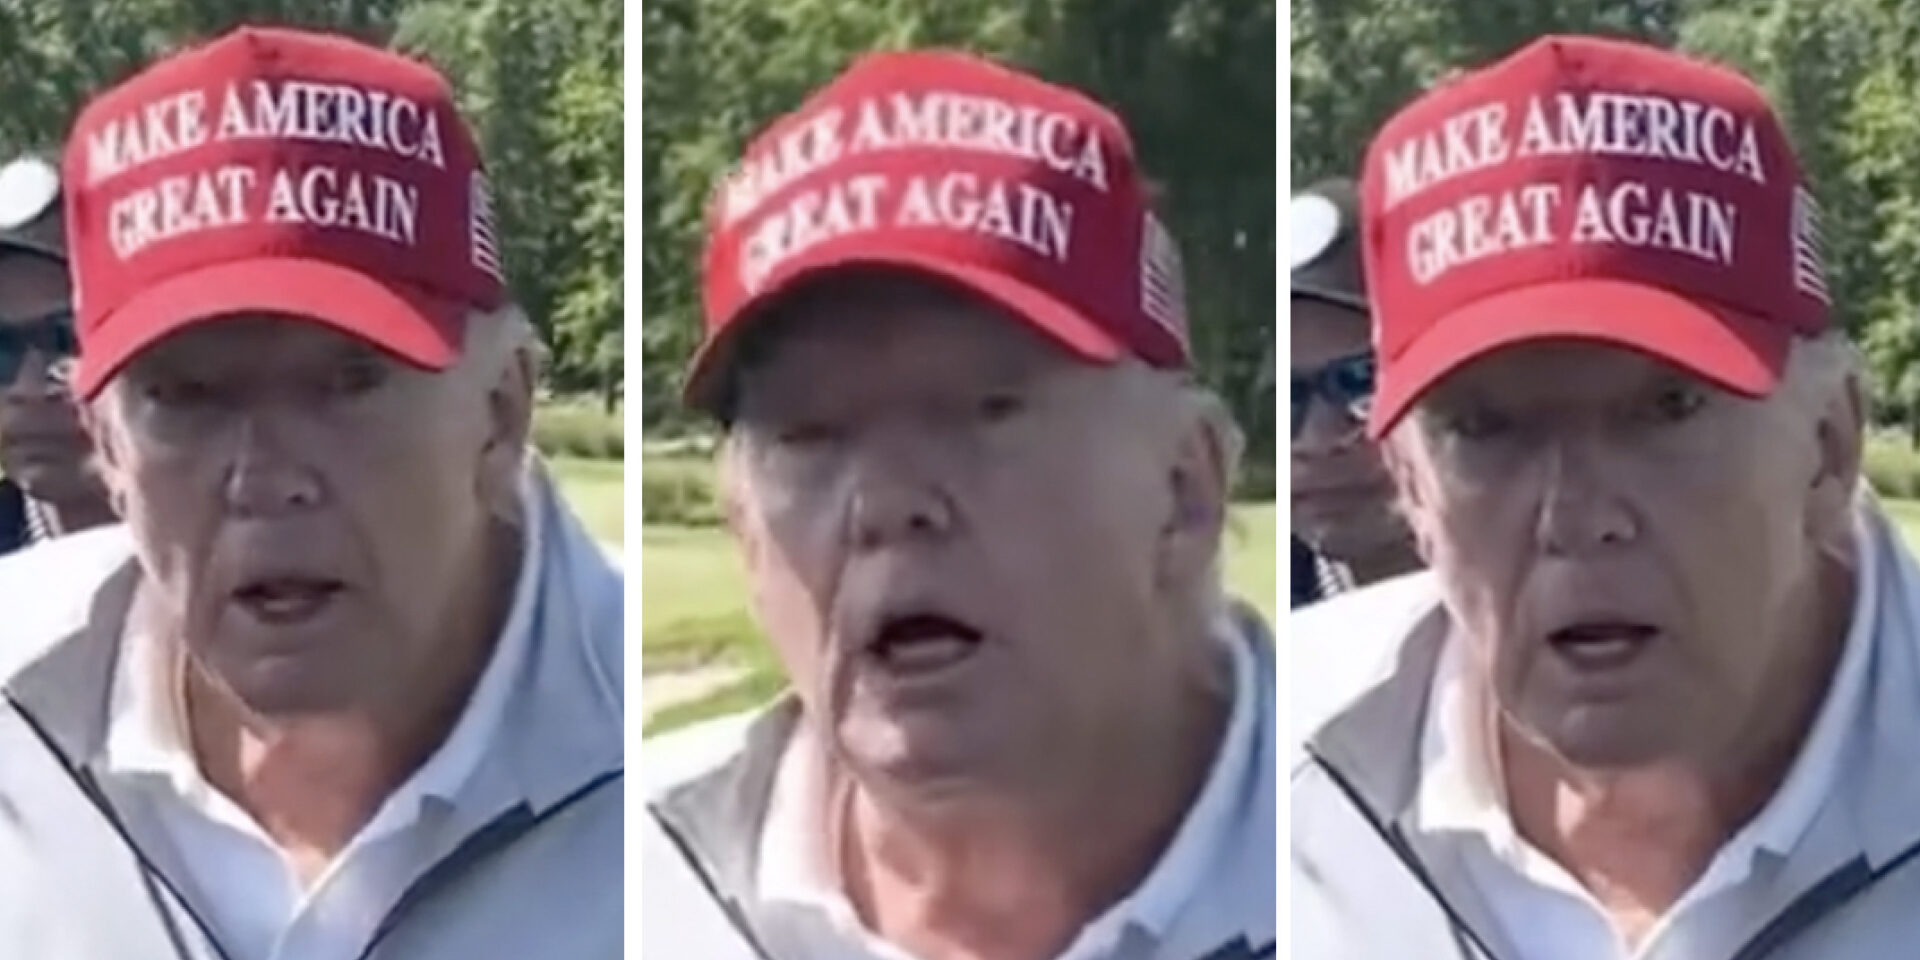 Shocking Video of Trump Shows a Decrepit, Old Man Barely Able to Answer ...